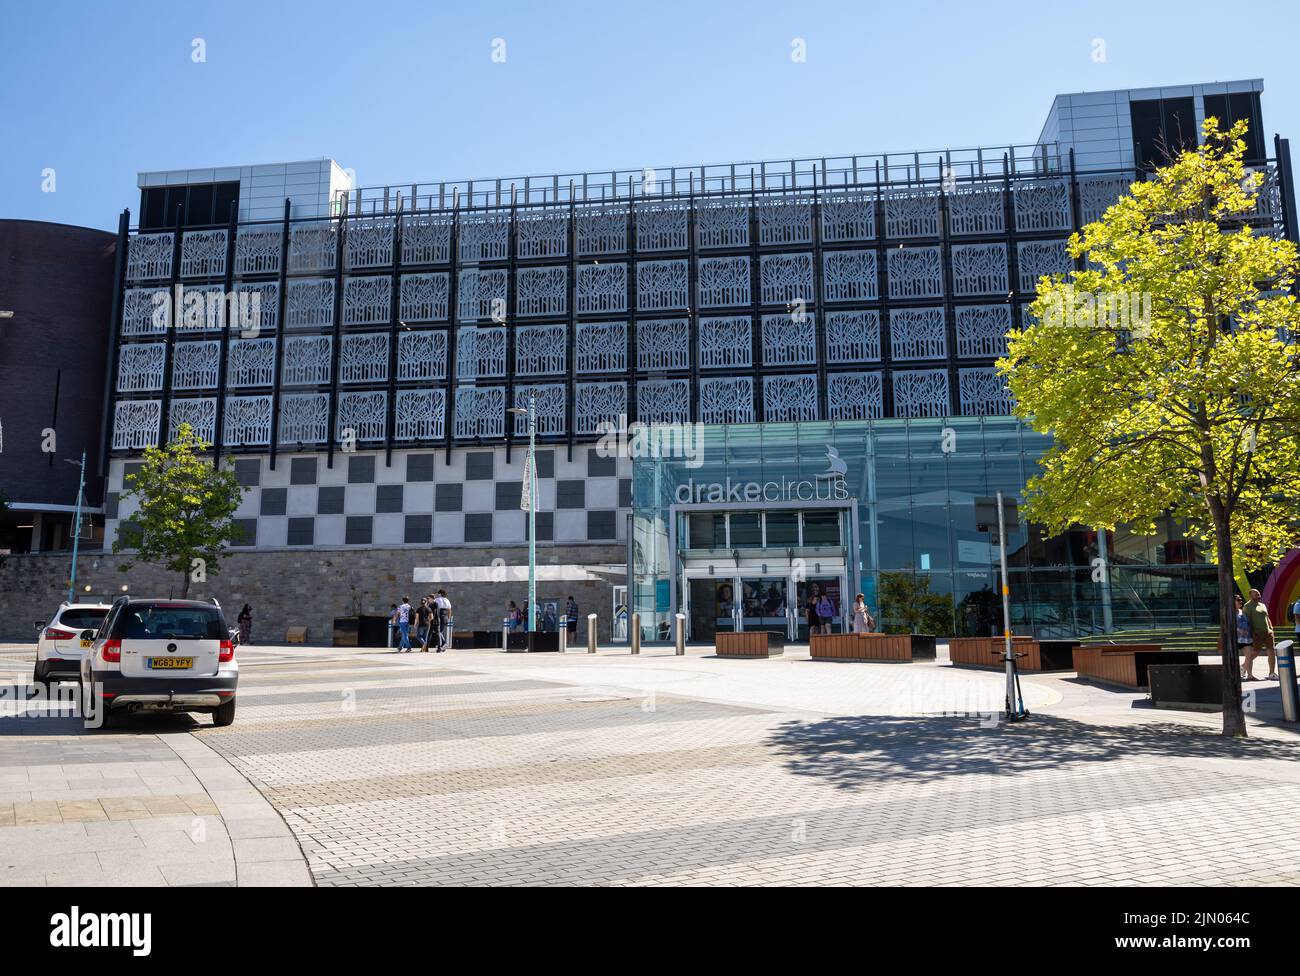 Drake Circus shopping mall in Plymouth on a hot sunny Day Stock Photo